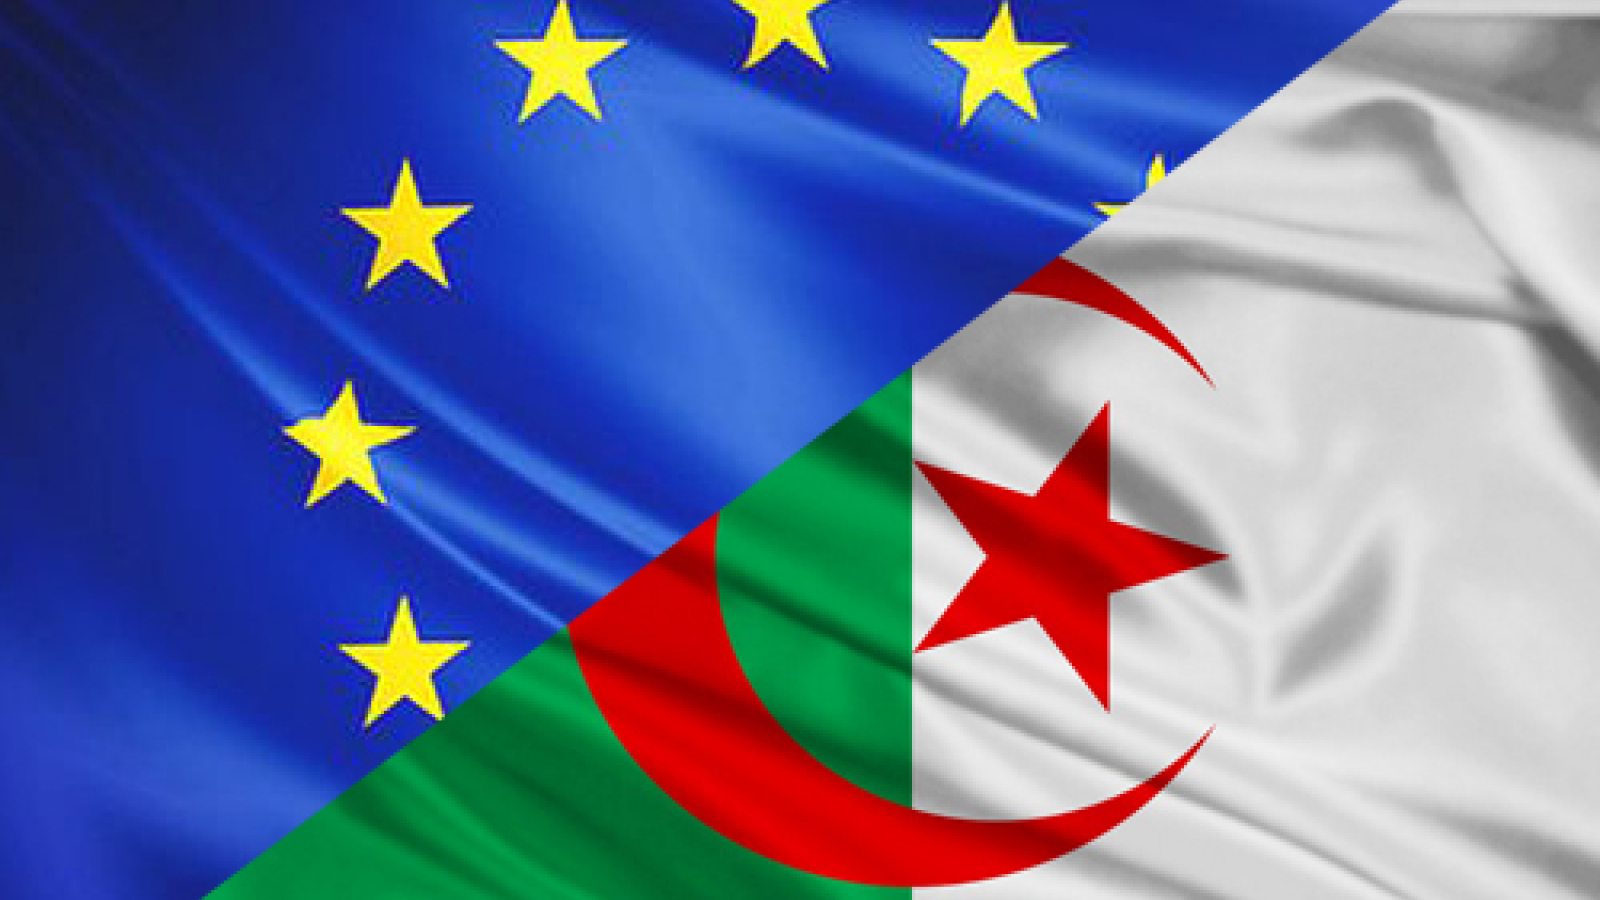 EP Harshly criticized the deteriorating situation of freedoms in Algeria